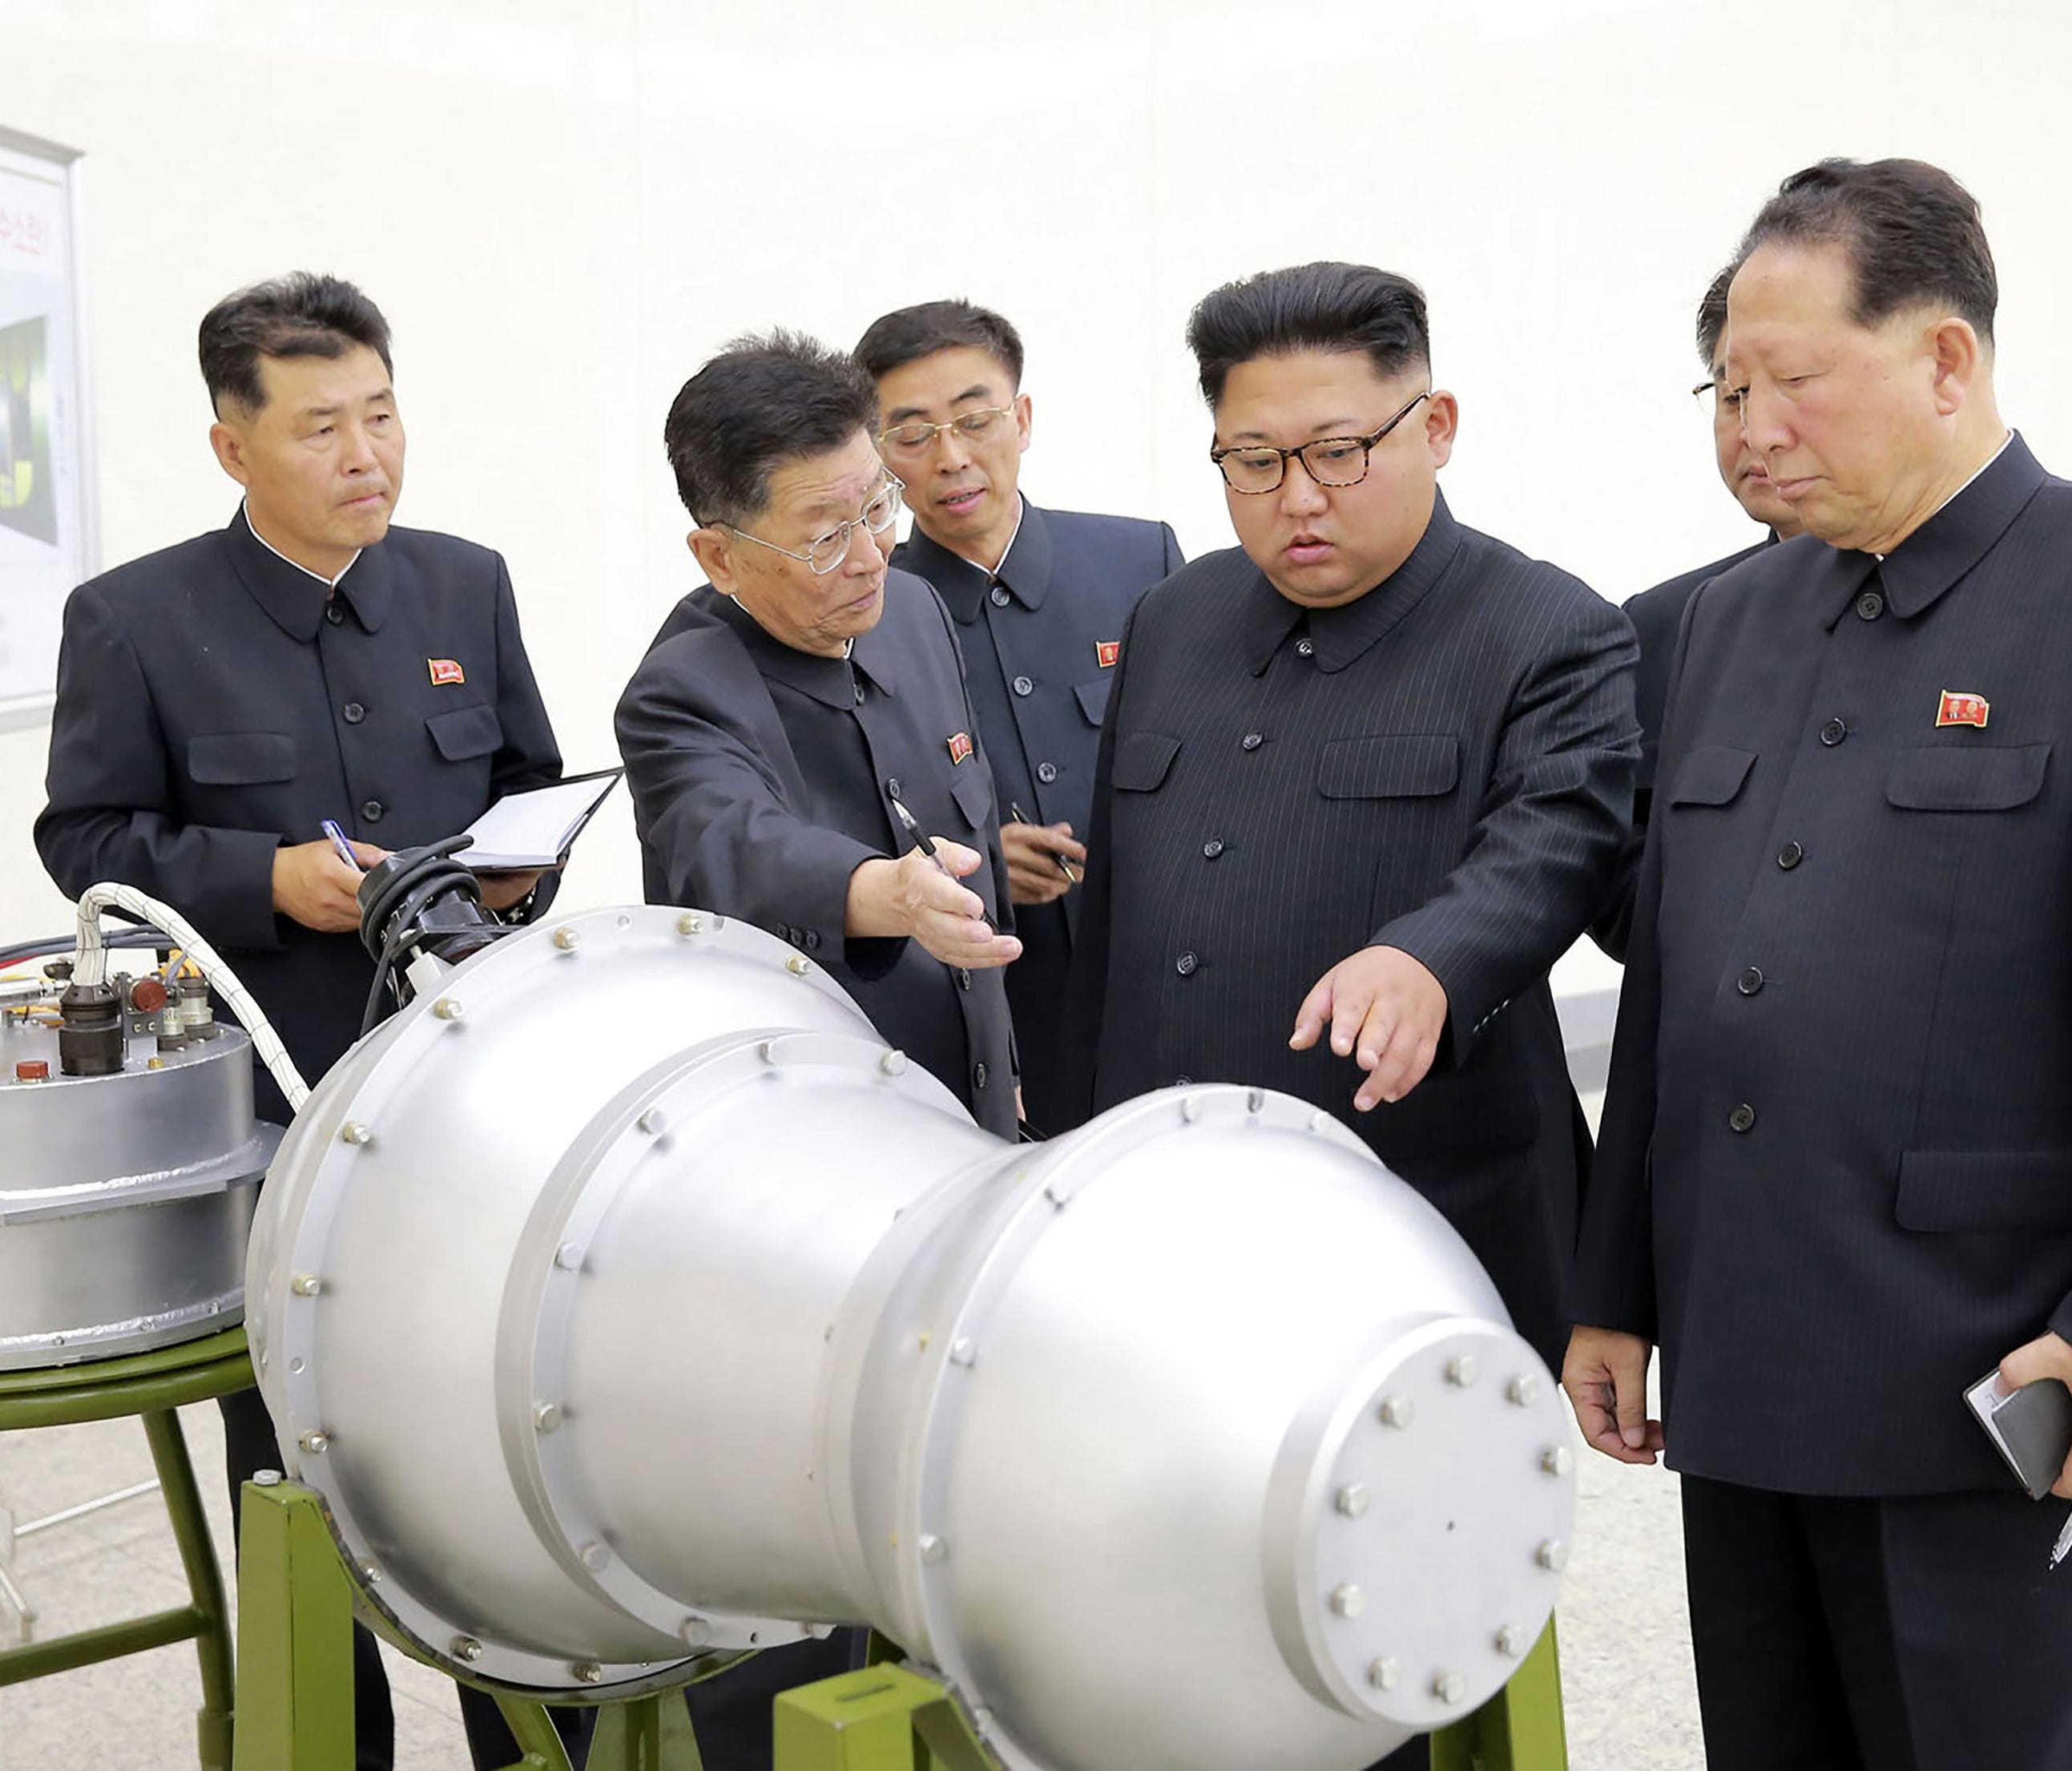 This undated picture released by North Korea's official Korean Central News Agency (KCNA) shows North Korean leader Kim Jong-Un (C) looking at a metal casing with two bulges at an undisclosed location.